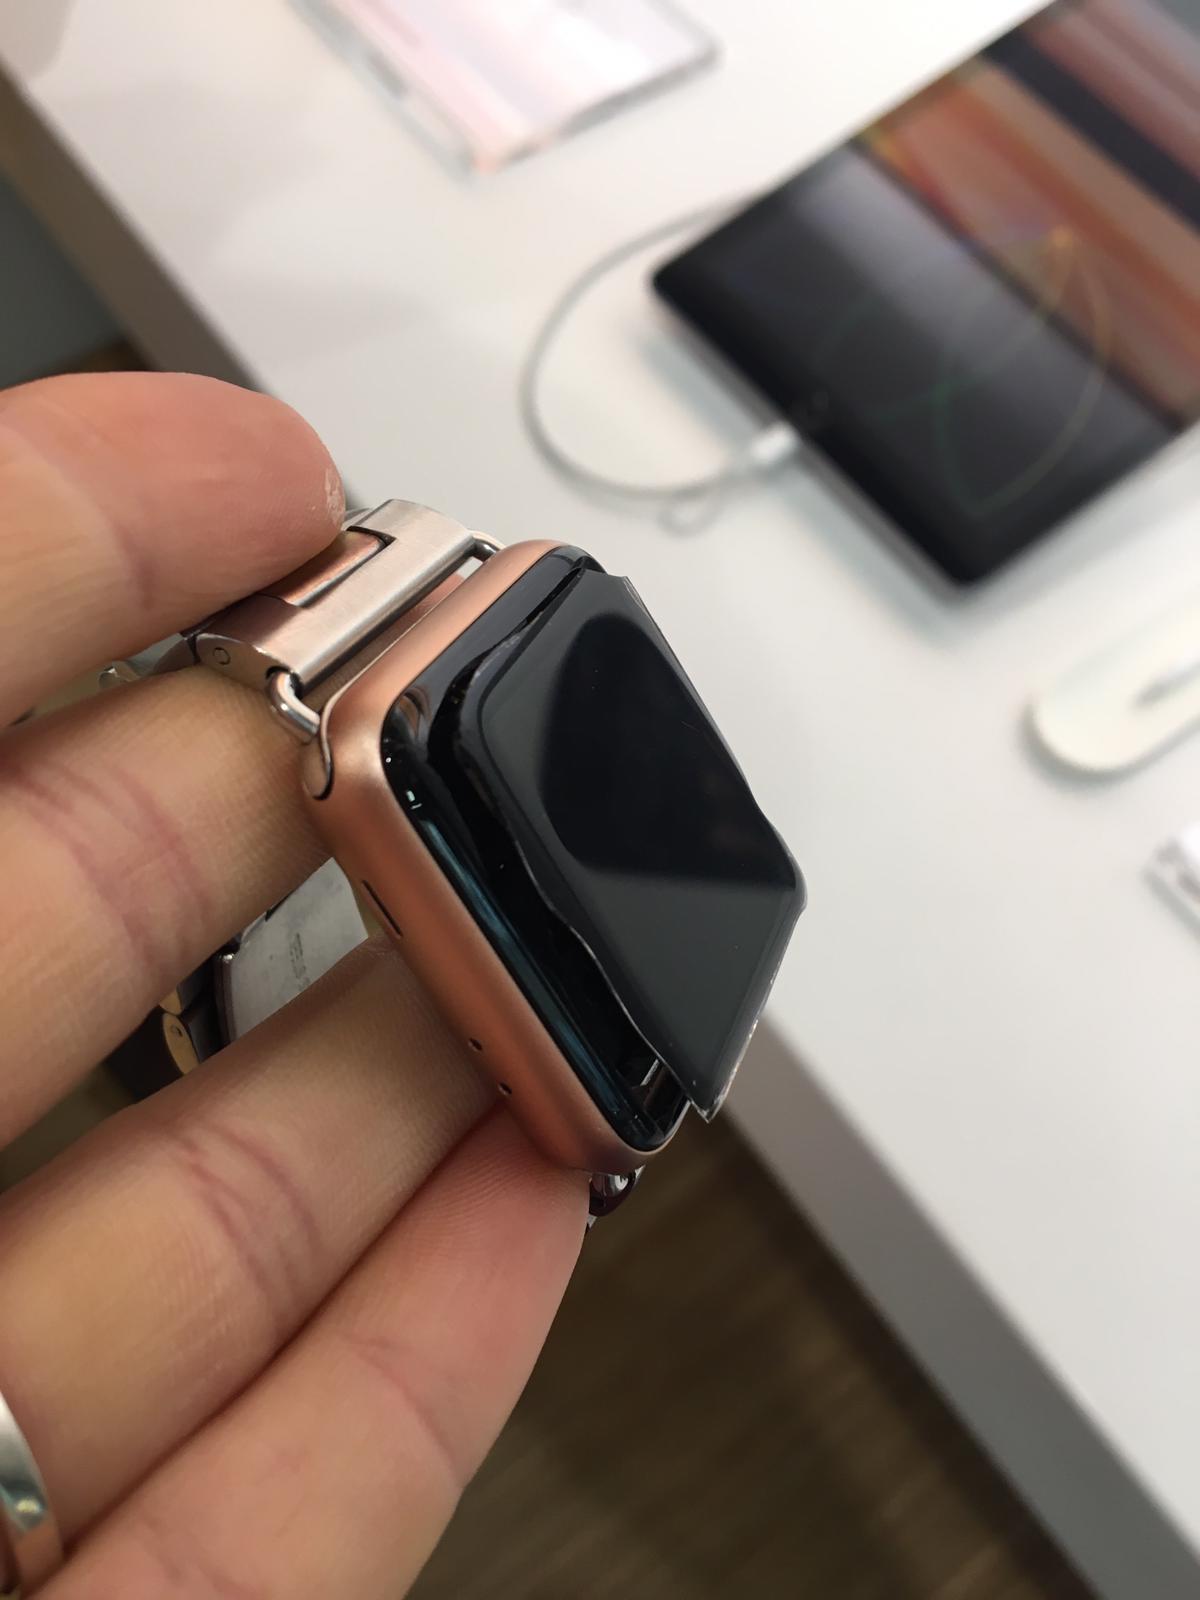 Apple Watch series 3 screen popped out - Apple Community